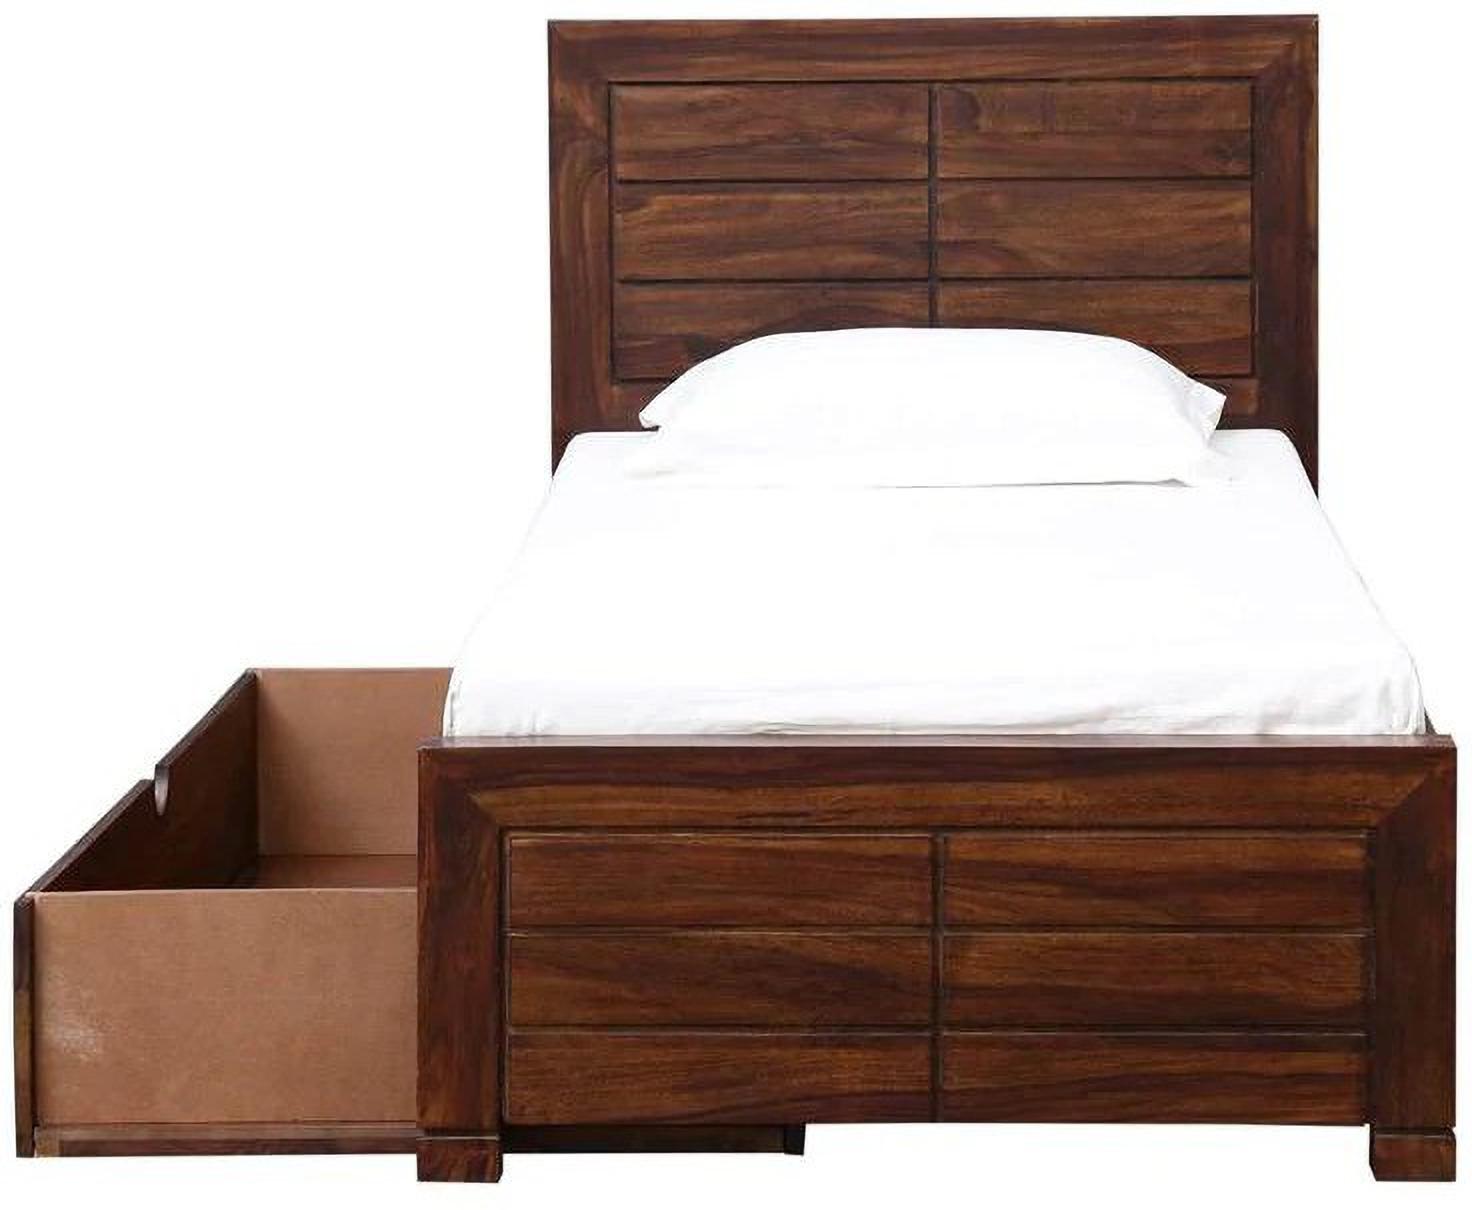 Aaram By Zebrs Solid Wood Single Drawer Bed (Finish Color - Provincial Teak, Delivery Condition - DIY(Do-It-Yourself))